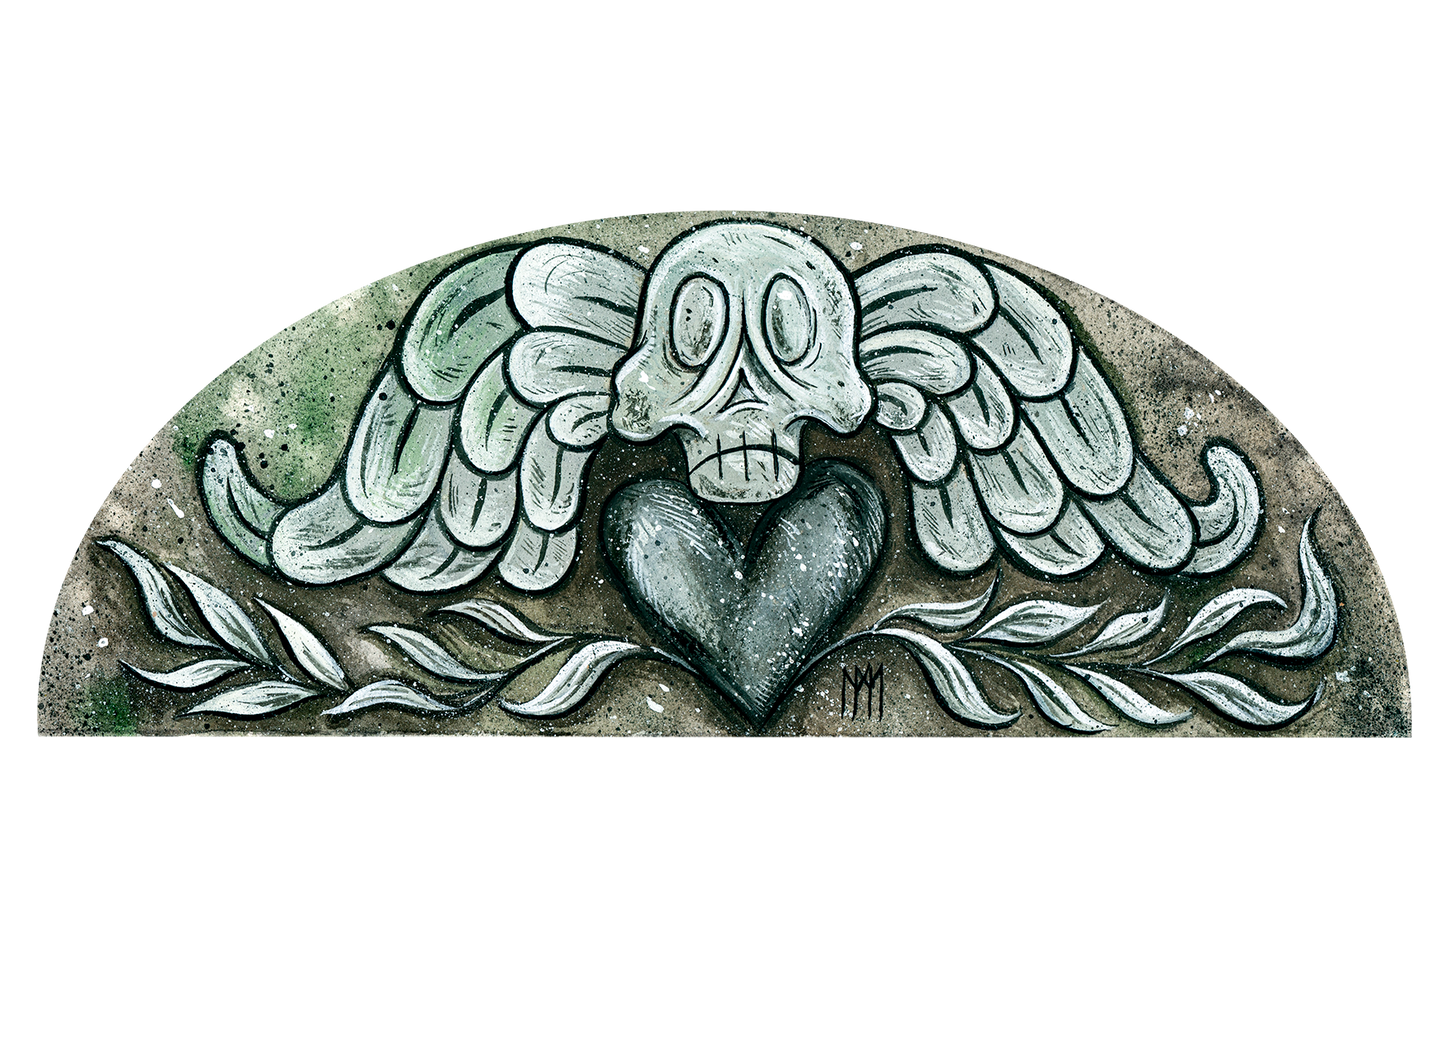 Death Head with Heart Lunette Giclee Print